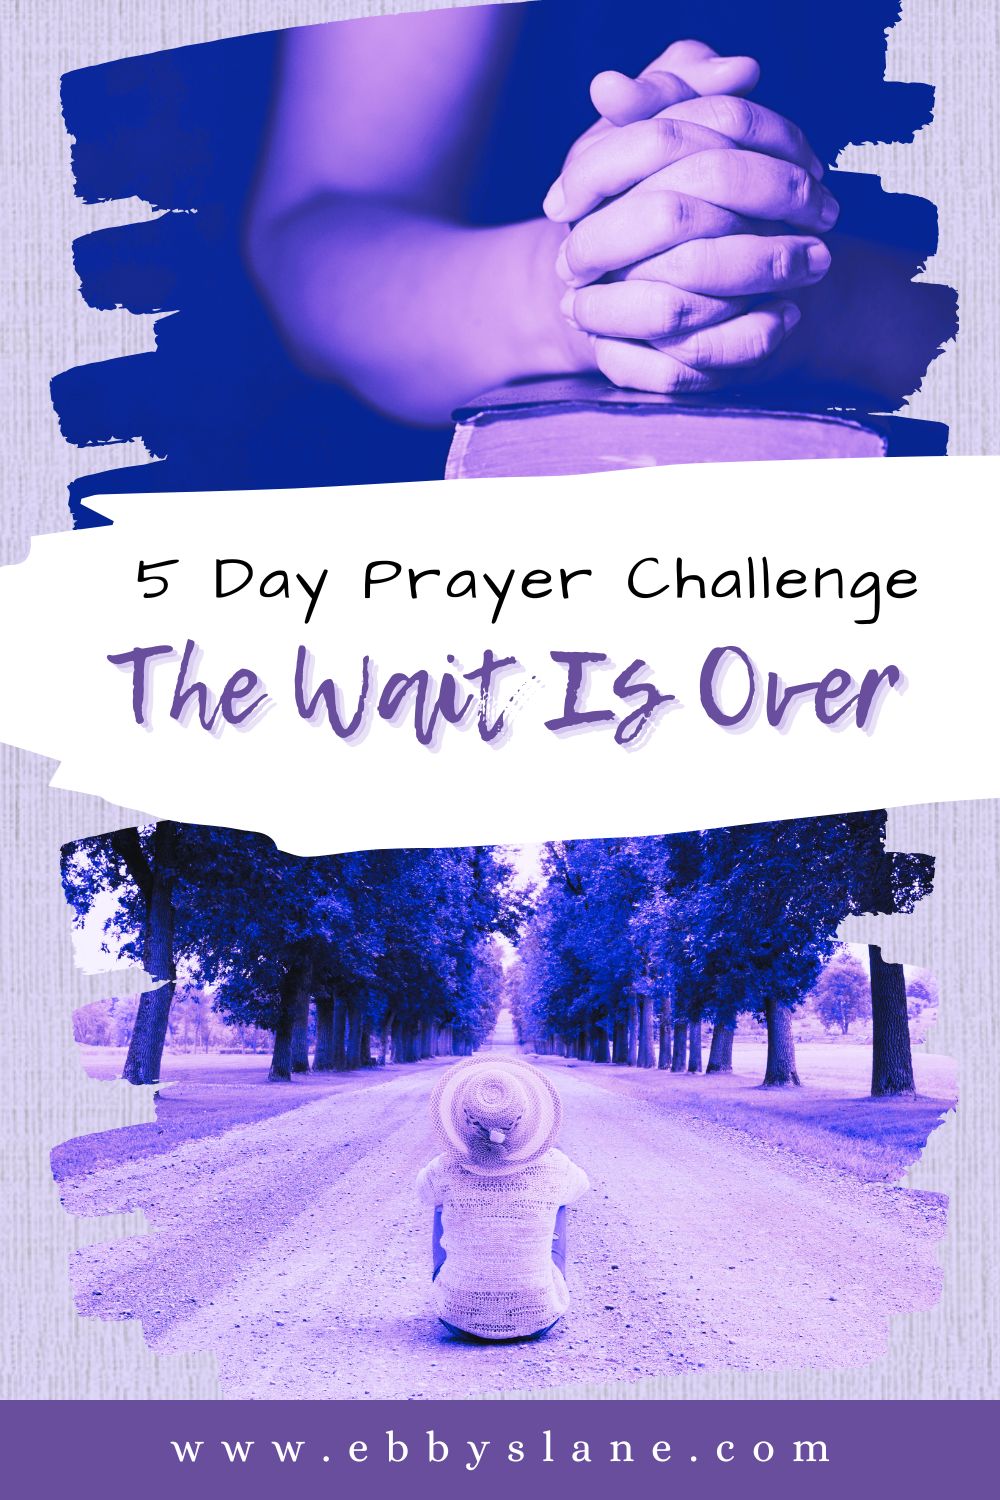 hands clasp over a bible in the top image. bottom image is a woman sitting in the middle of a dirt road. The words 5 Day prayer challenge: The Wait is Over in the middle.